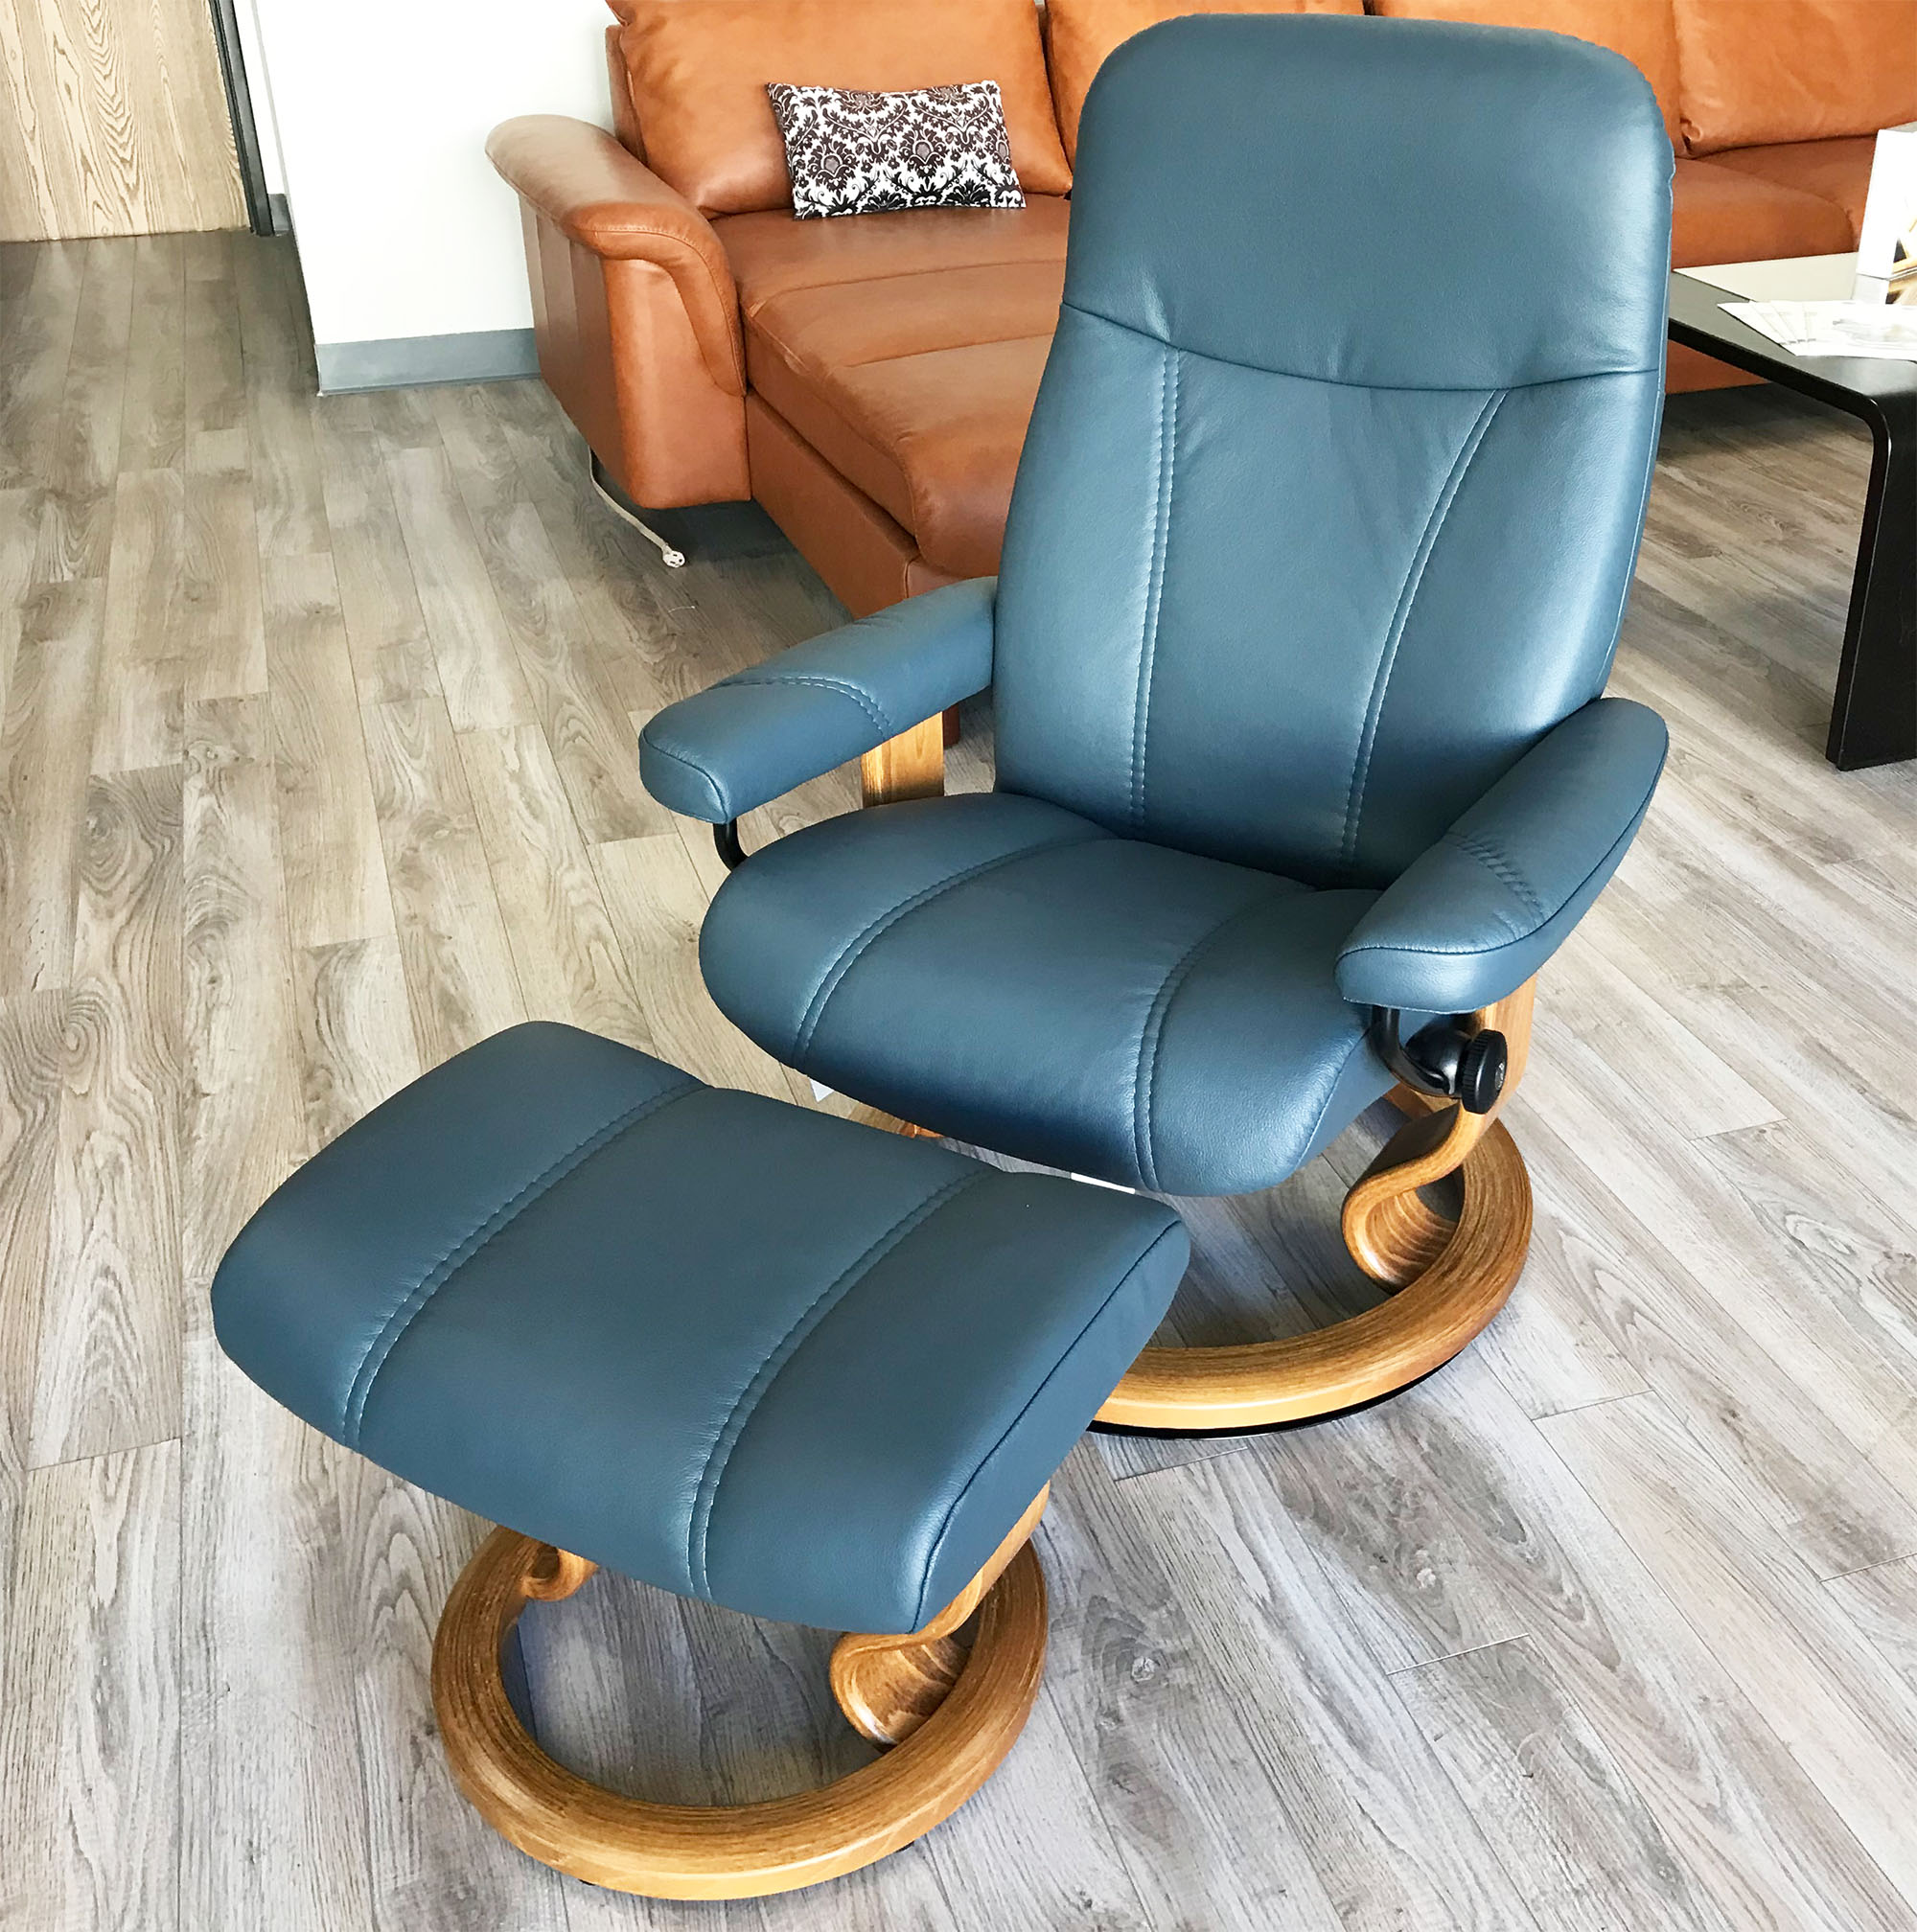 Stressless Consul Recliner Chair And, Stressless Leather Chairs